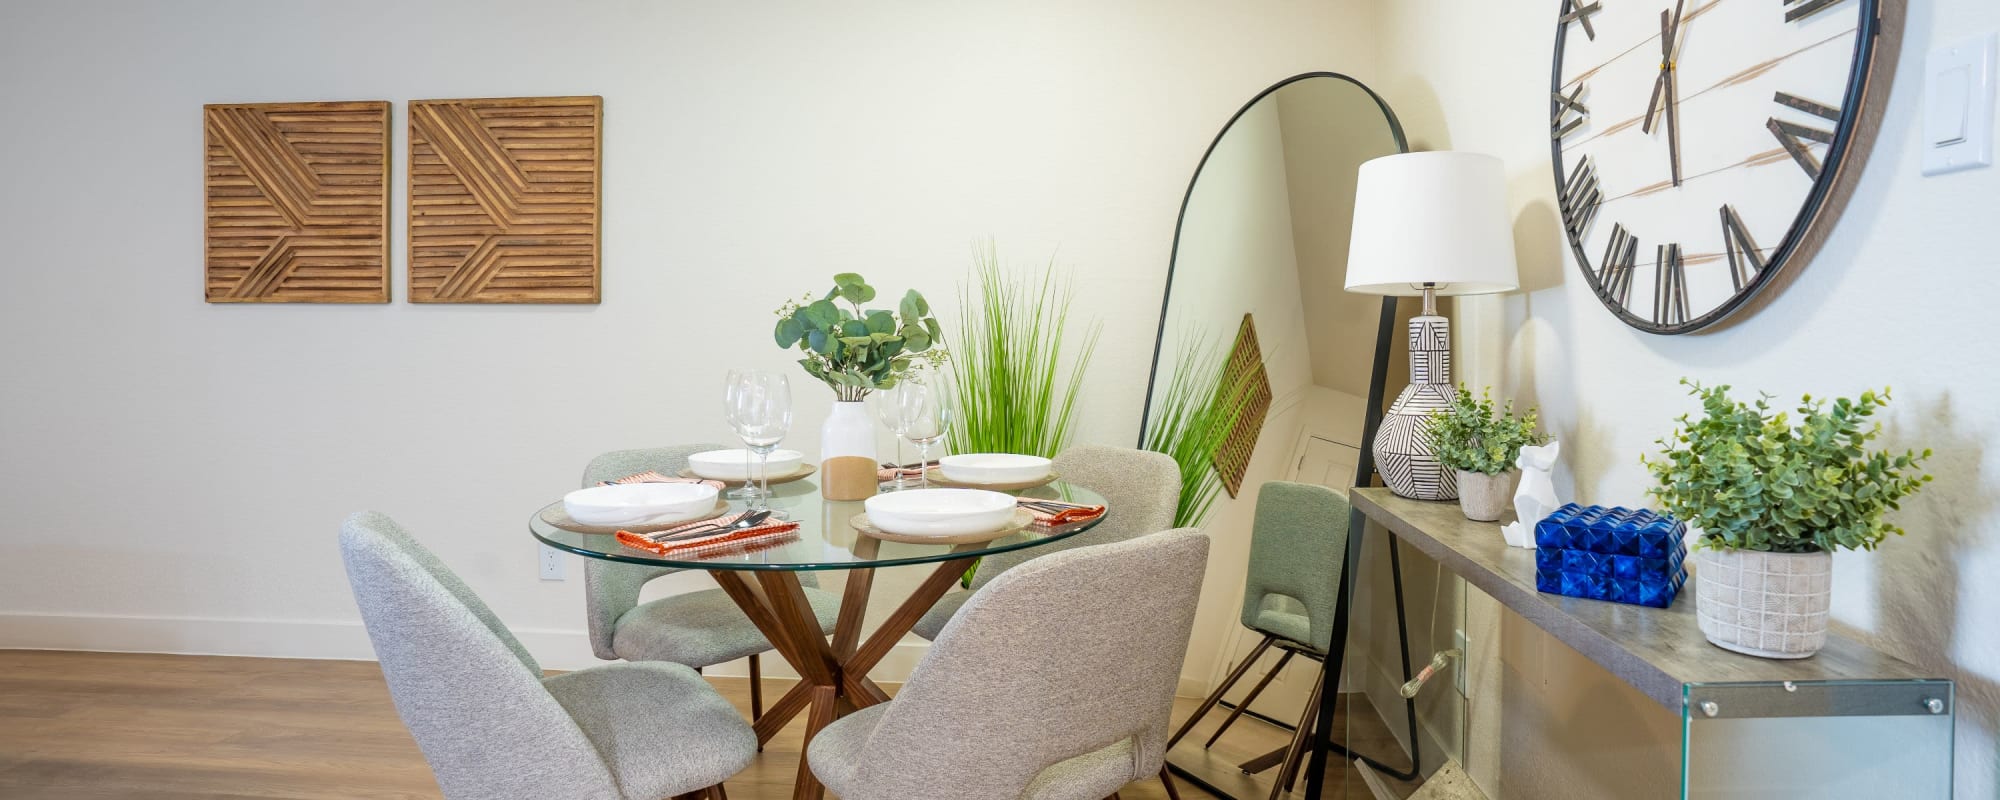 Dining table and mirror at Riverside Apartments in Tempe, Arizona